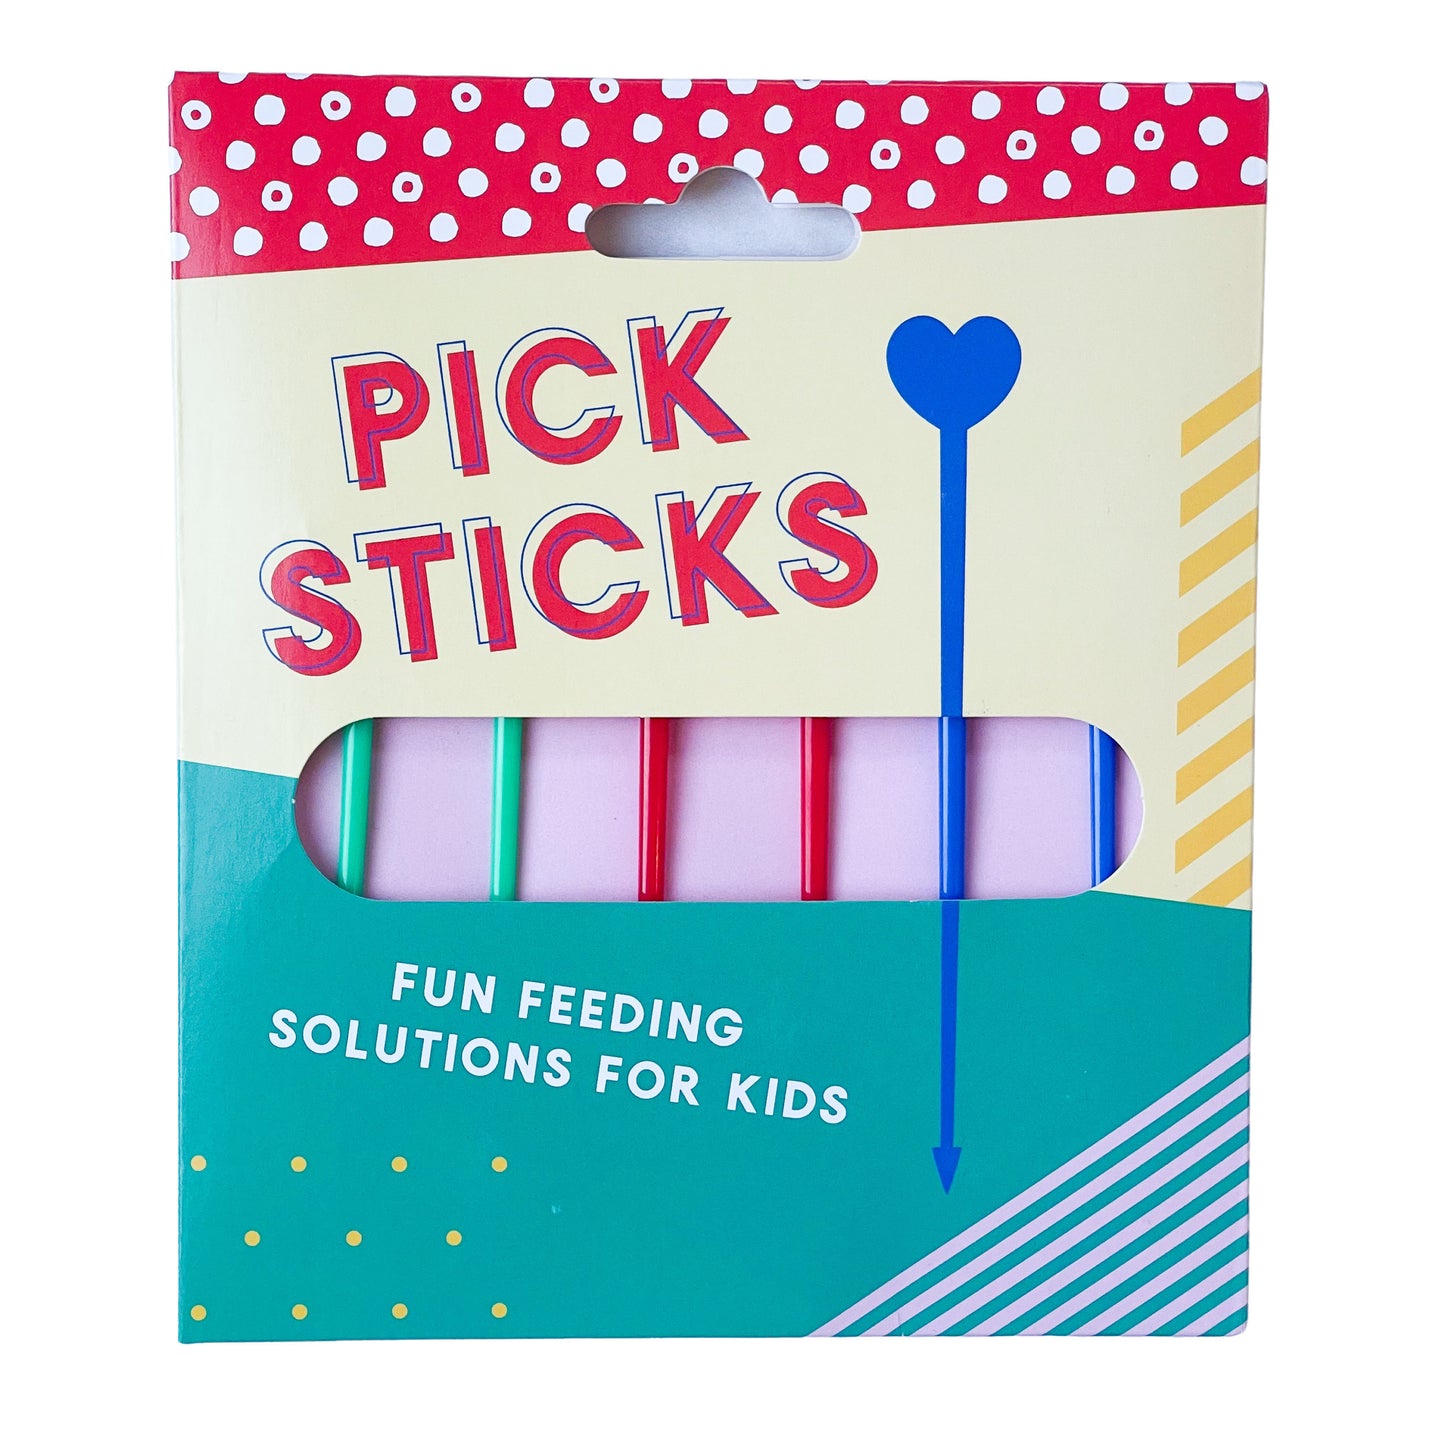 Pick Sticks Brights food skewers for kids in their colourful packaging from the front.